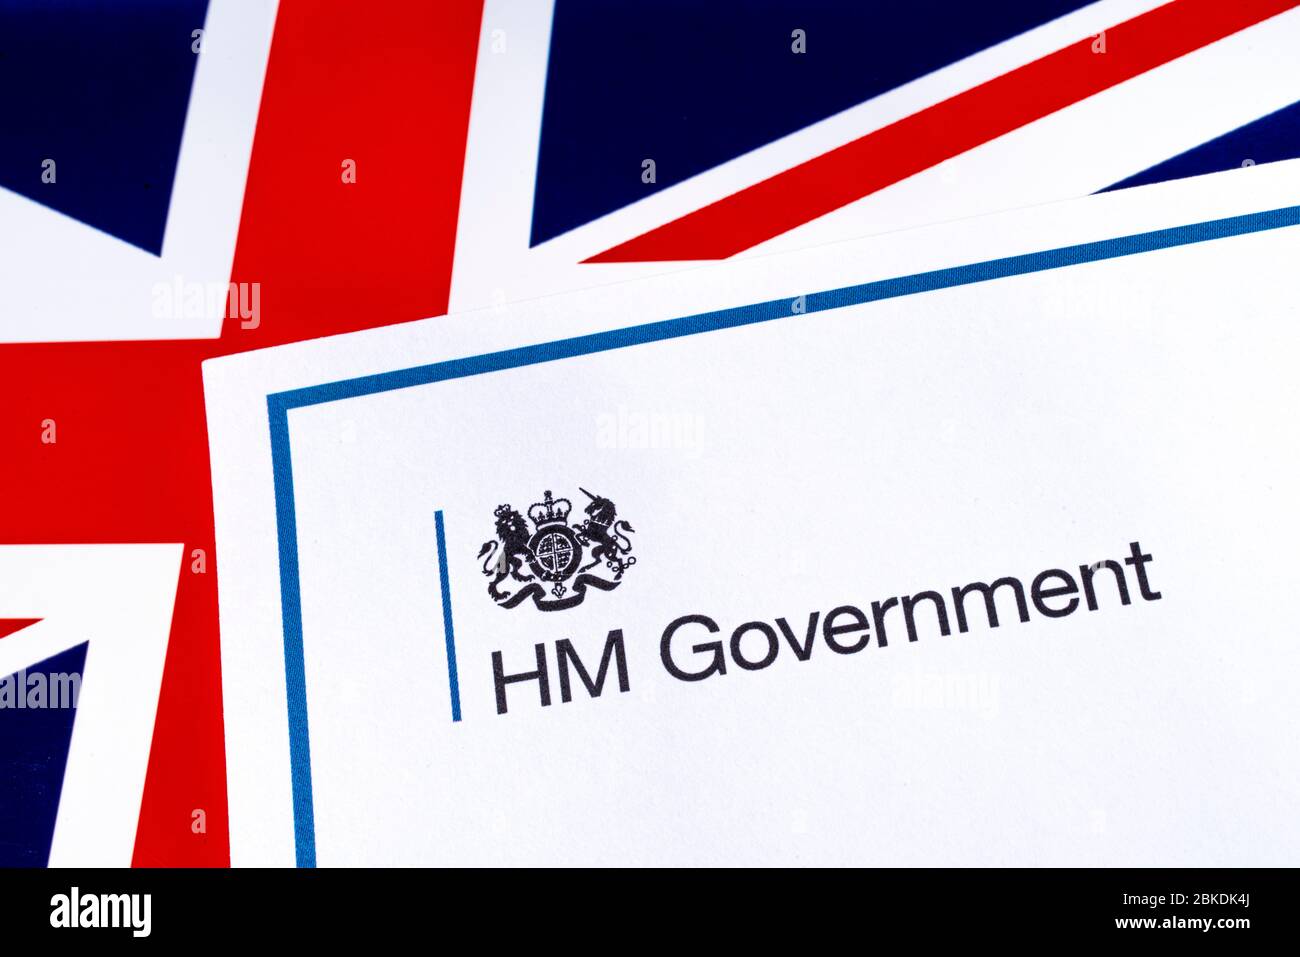 London, UK - April 20th 2020: HM Government heading with a UK flag background. Stock Photo